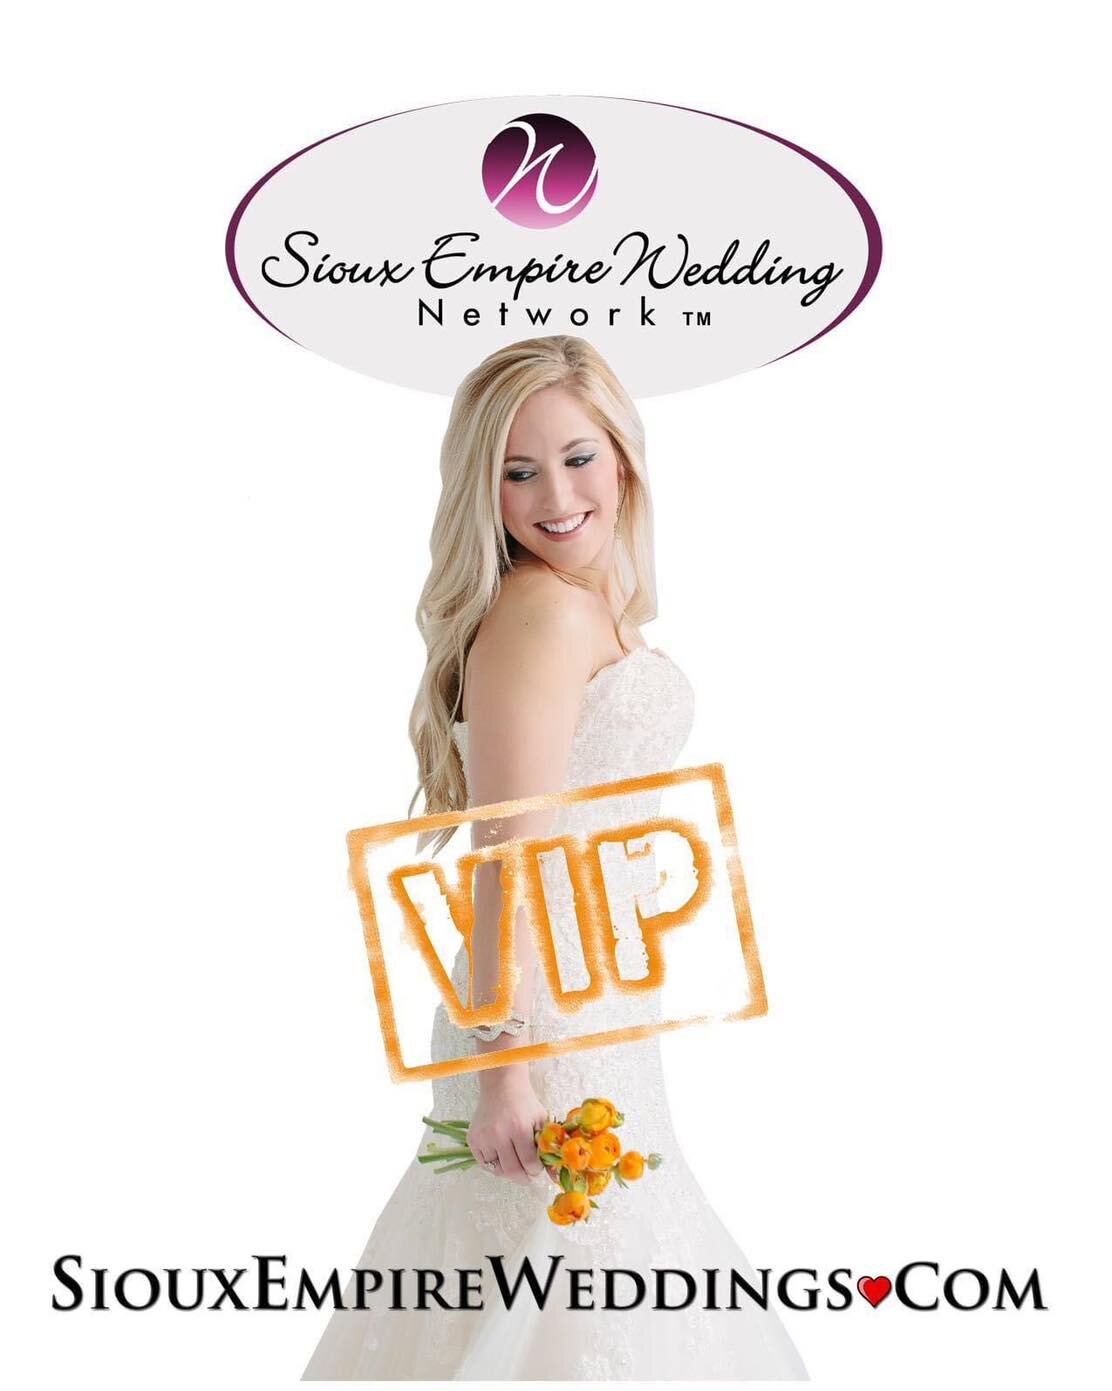 THIS SUNDAY!! Are you going to be a VIP BRIDE 👰🏼 

The #1 Sioux Falls LARGEST and MOST ATTENDED WEDDING and FASHION SHOWCASE at the Sioux Falls Convention Center on February 18th from 12-3PM! 

GET YOUR TICKETS HERE: https://siouxempireweddingshowc